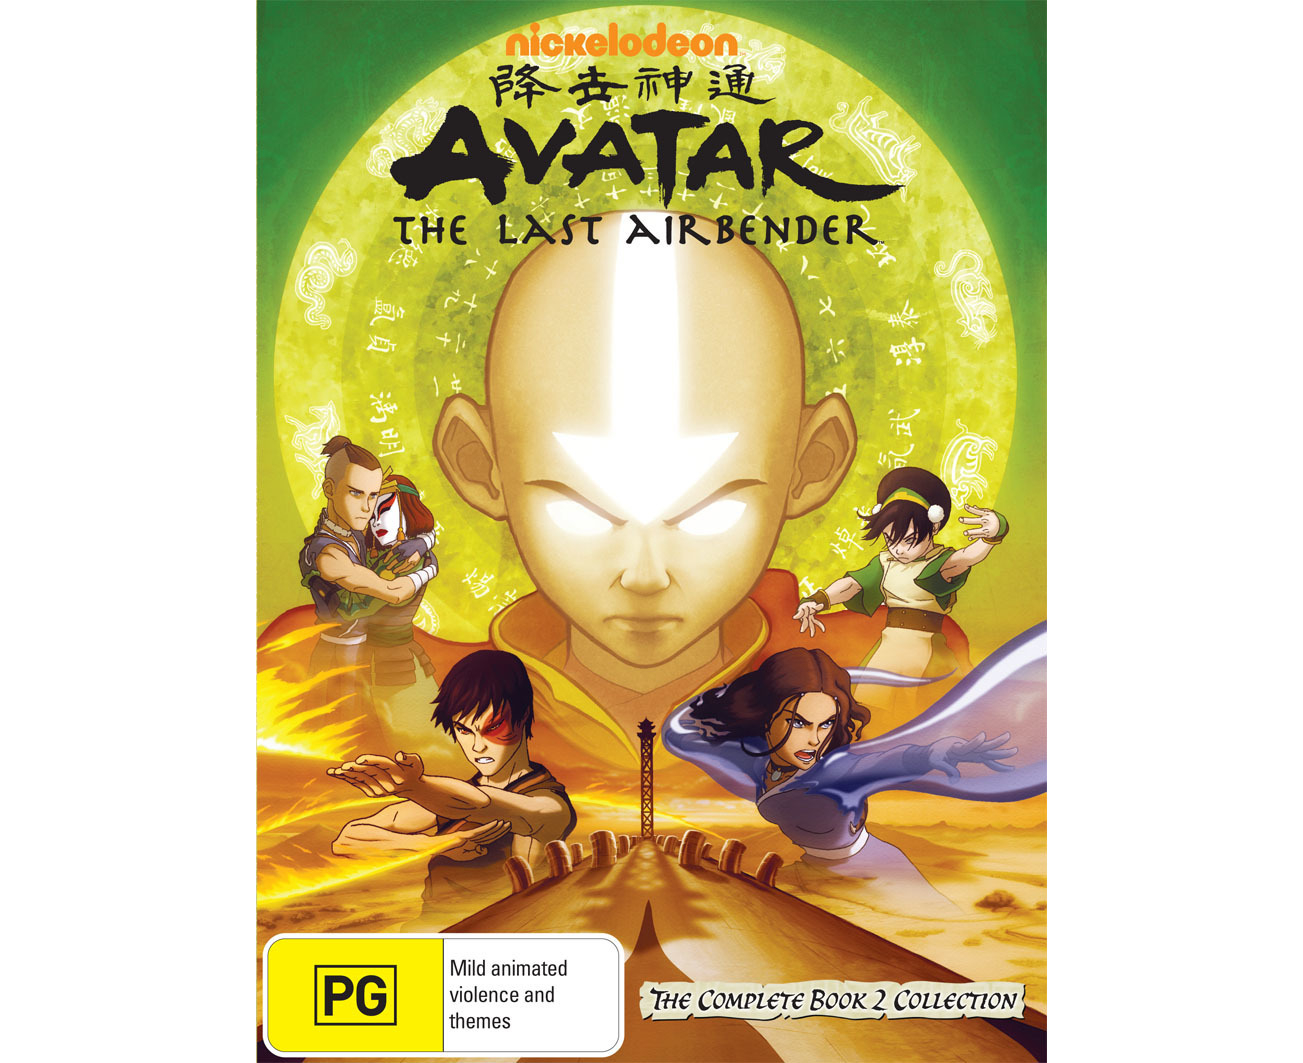 Avatar The Last Airbender The Complete Book 2 Collection DVD Region 4 |  Catch.com.au